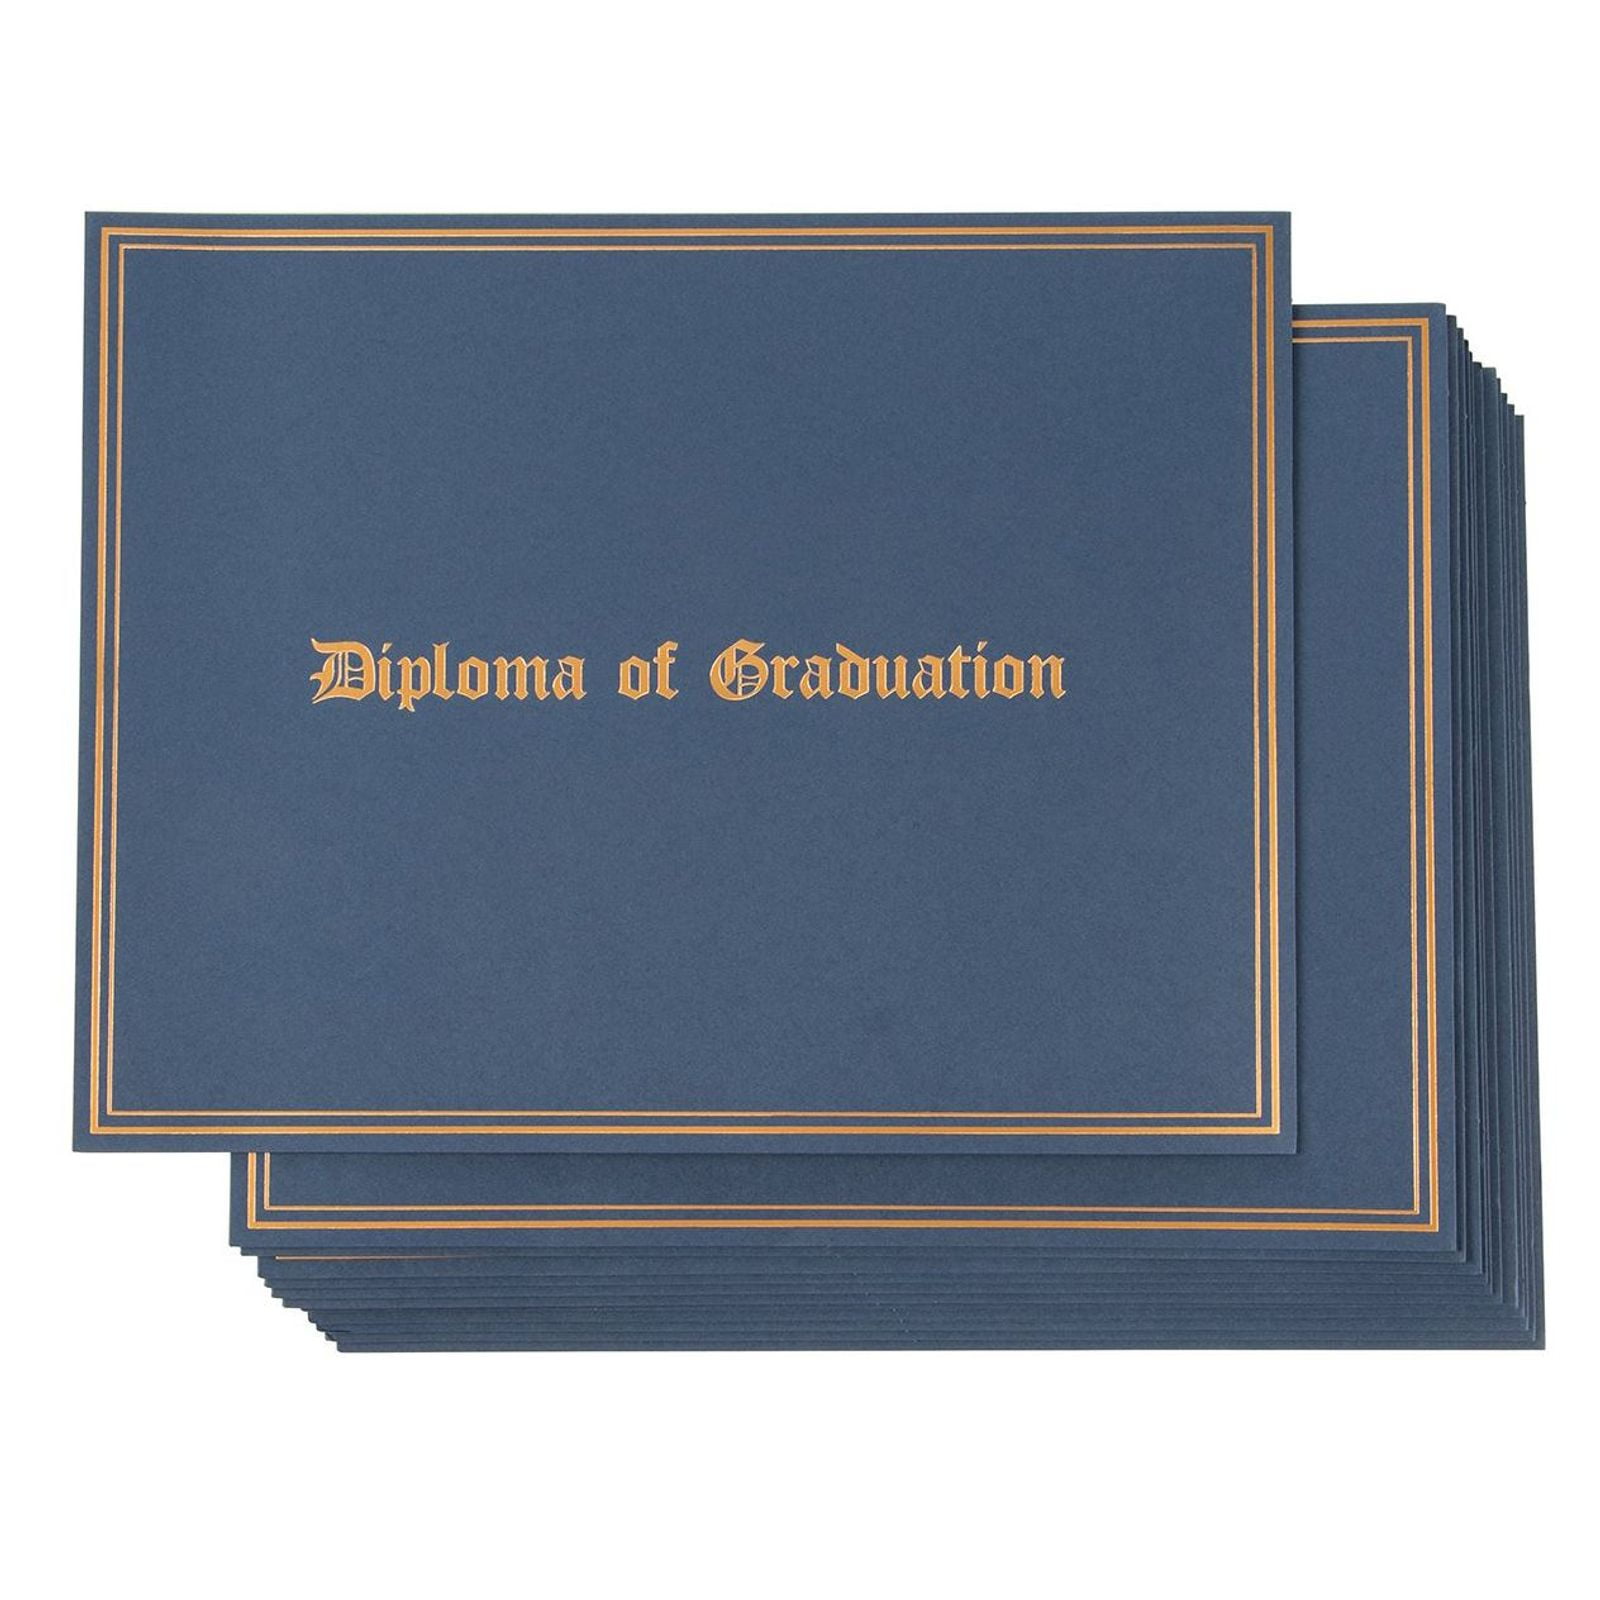 Document Holder for Letter-Sized Award Certificates Blue with Diploma of Graduation Gold Foil Print Designs 11.2 x 8.7 Inches 12-Pack Diploma Covers for Graduation Ceremony Certificate Holder 